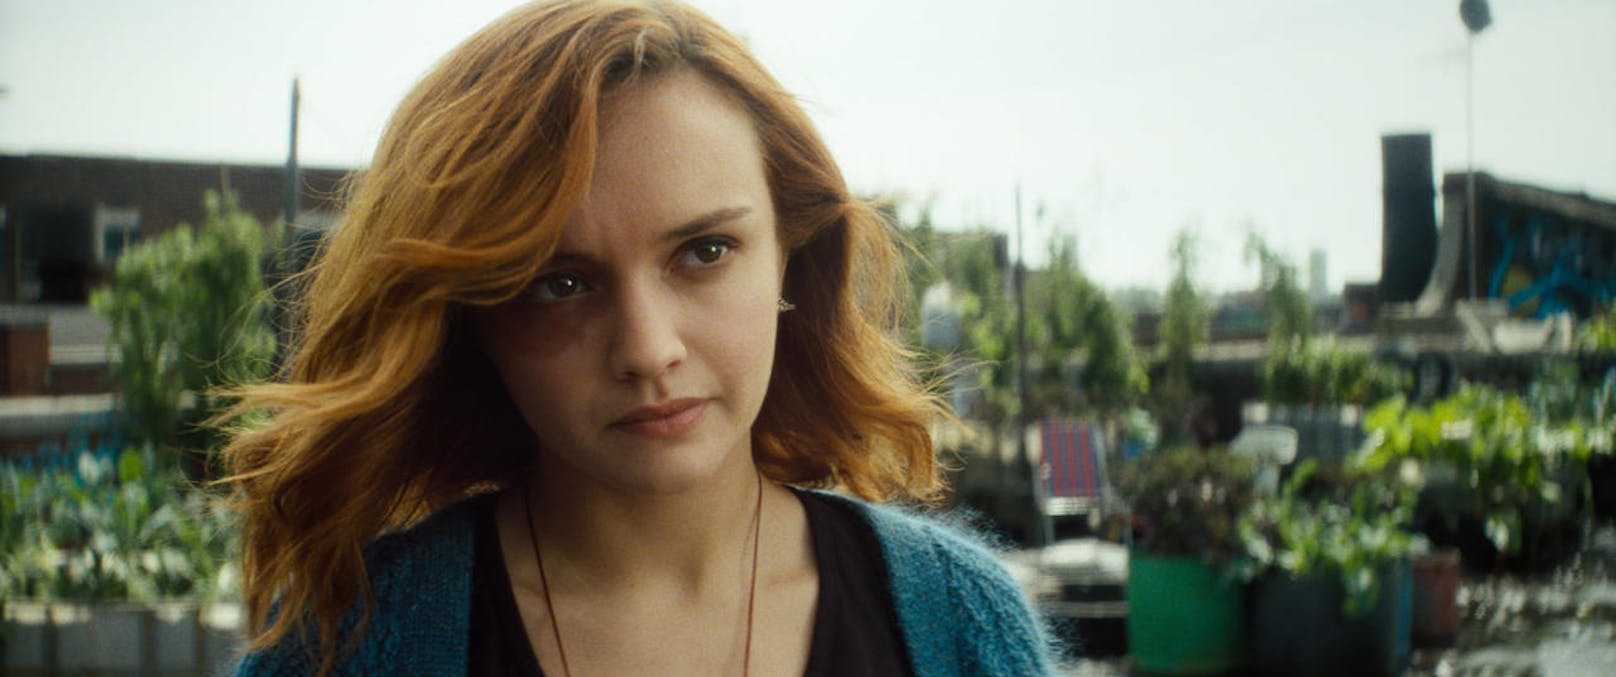 Olivia Cooke in "Ready Player One". 